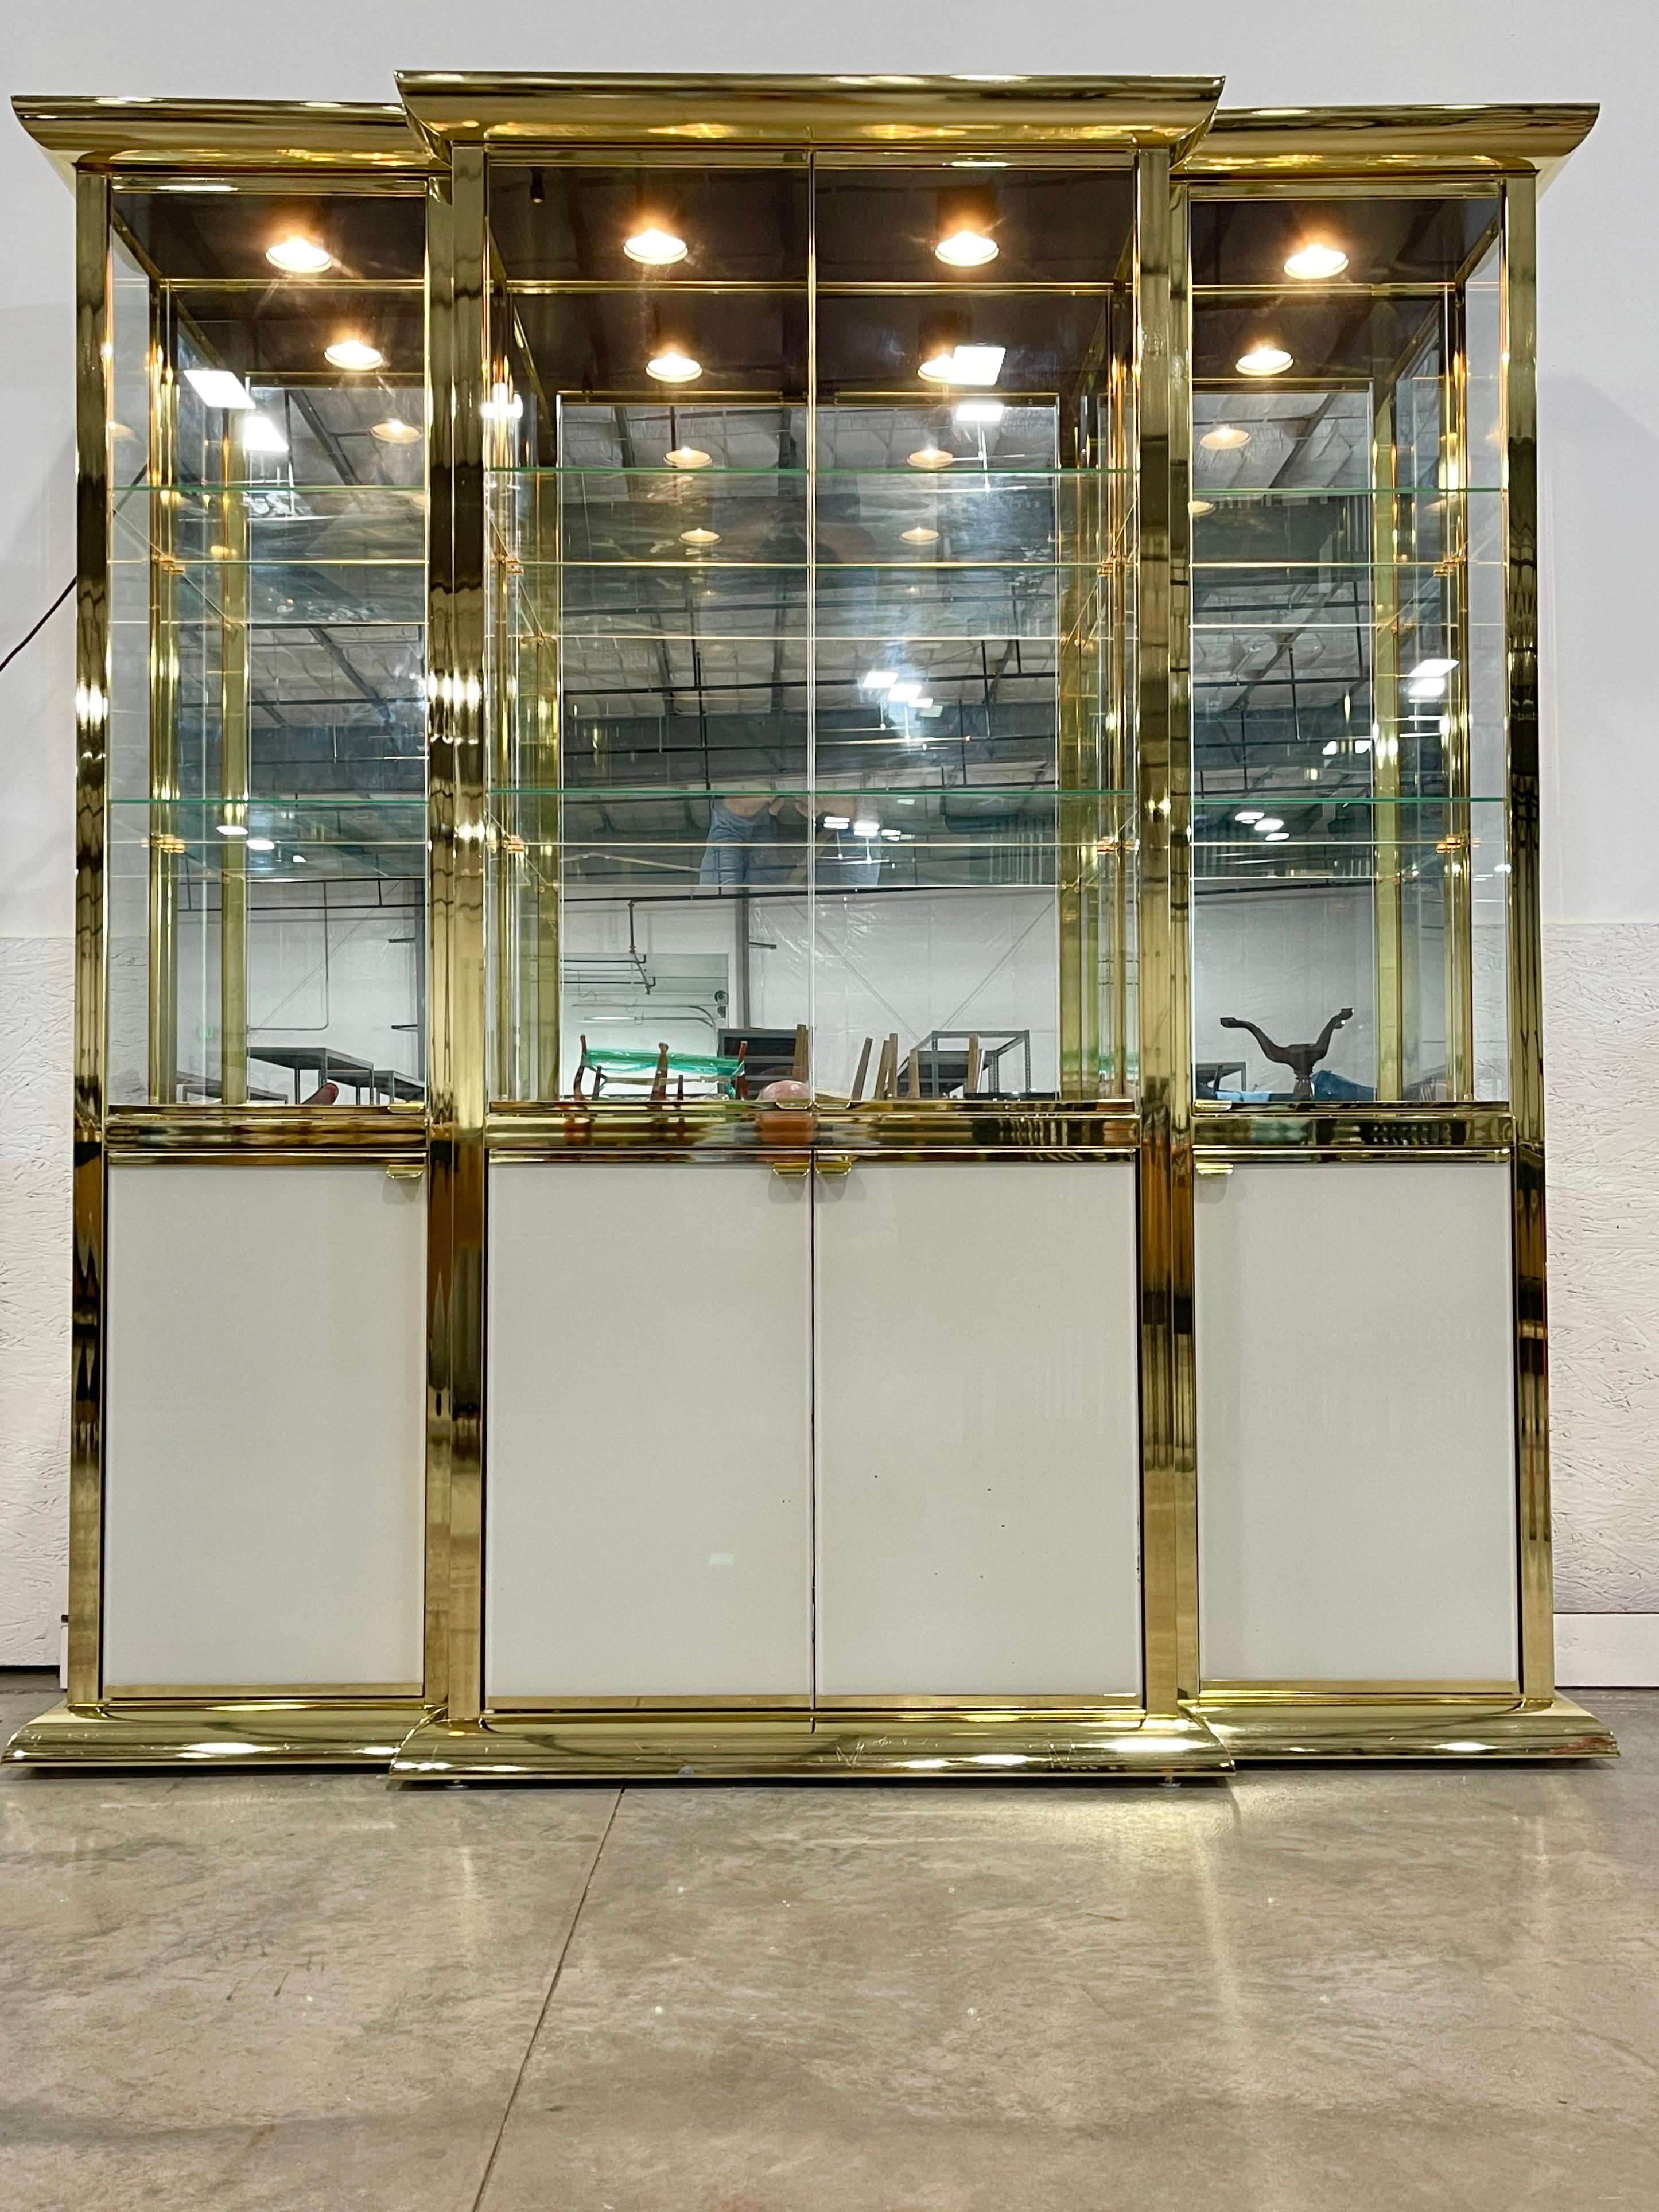 Show stopping showcase by Design Institute America from the 'golden age' before federal environmental laws forced metal electroplating businesses to close!
This triple wide vitrine (or dry bar) is slimmer (less deep) than many others so it makes an